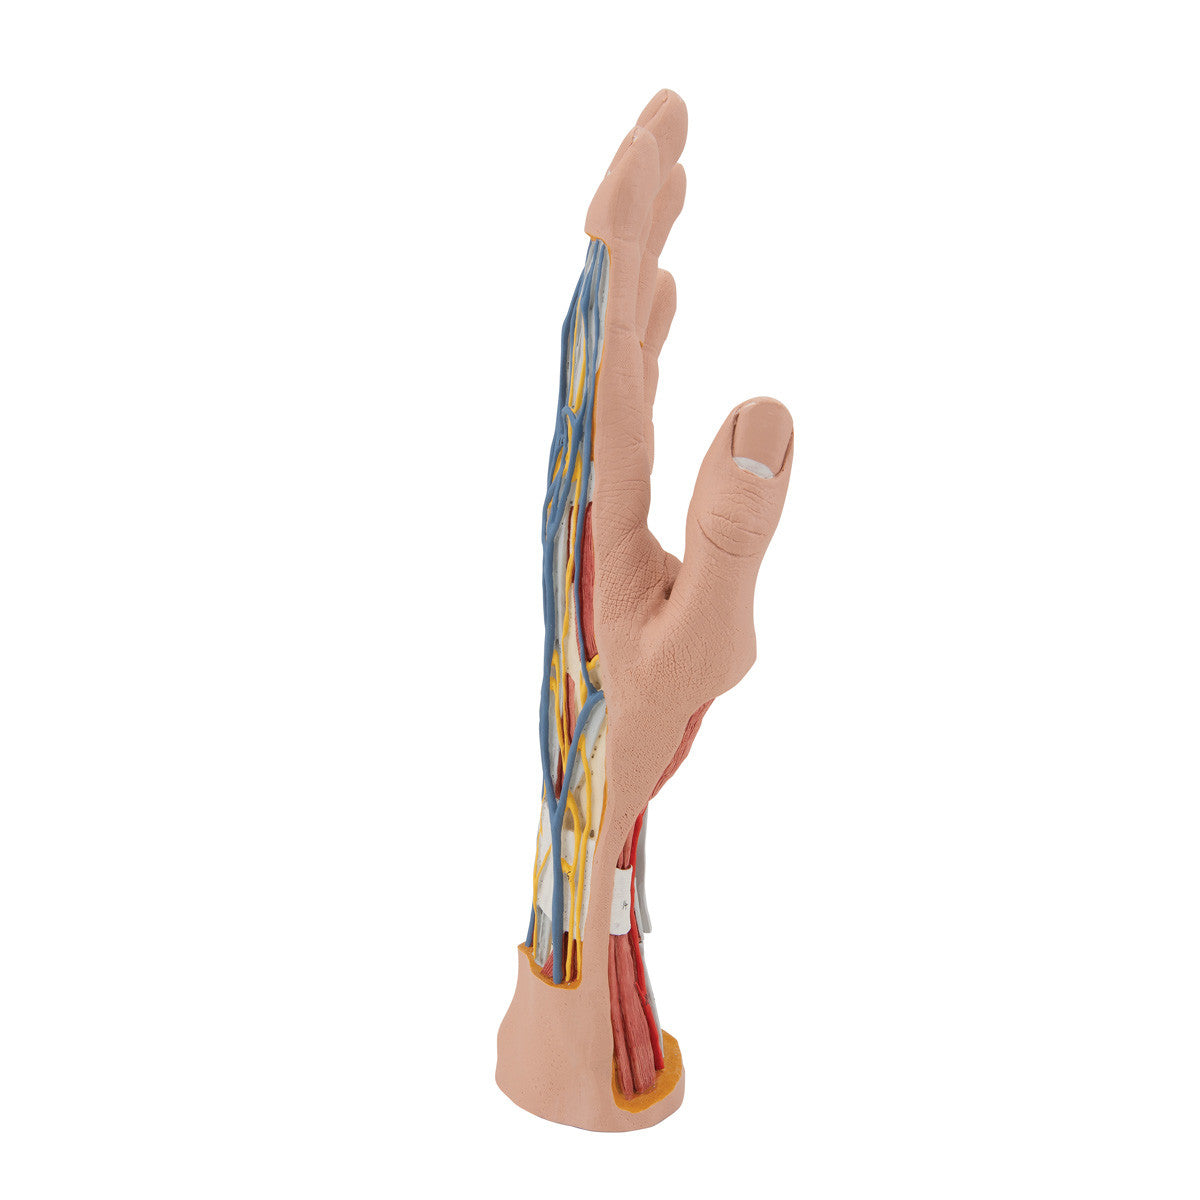 m18_03_1200_1200_life-size-hand-model-with-muscles-tendons-ligaments-nerves-arteries-3-part-3b-smart-anatomy__89921.1589752890.1280.1280.jpg